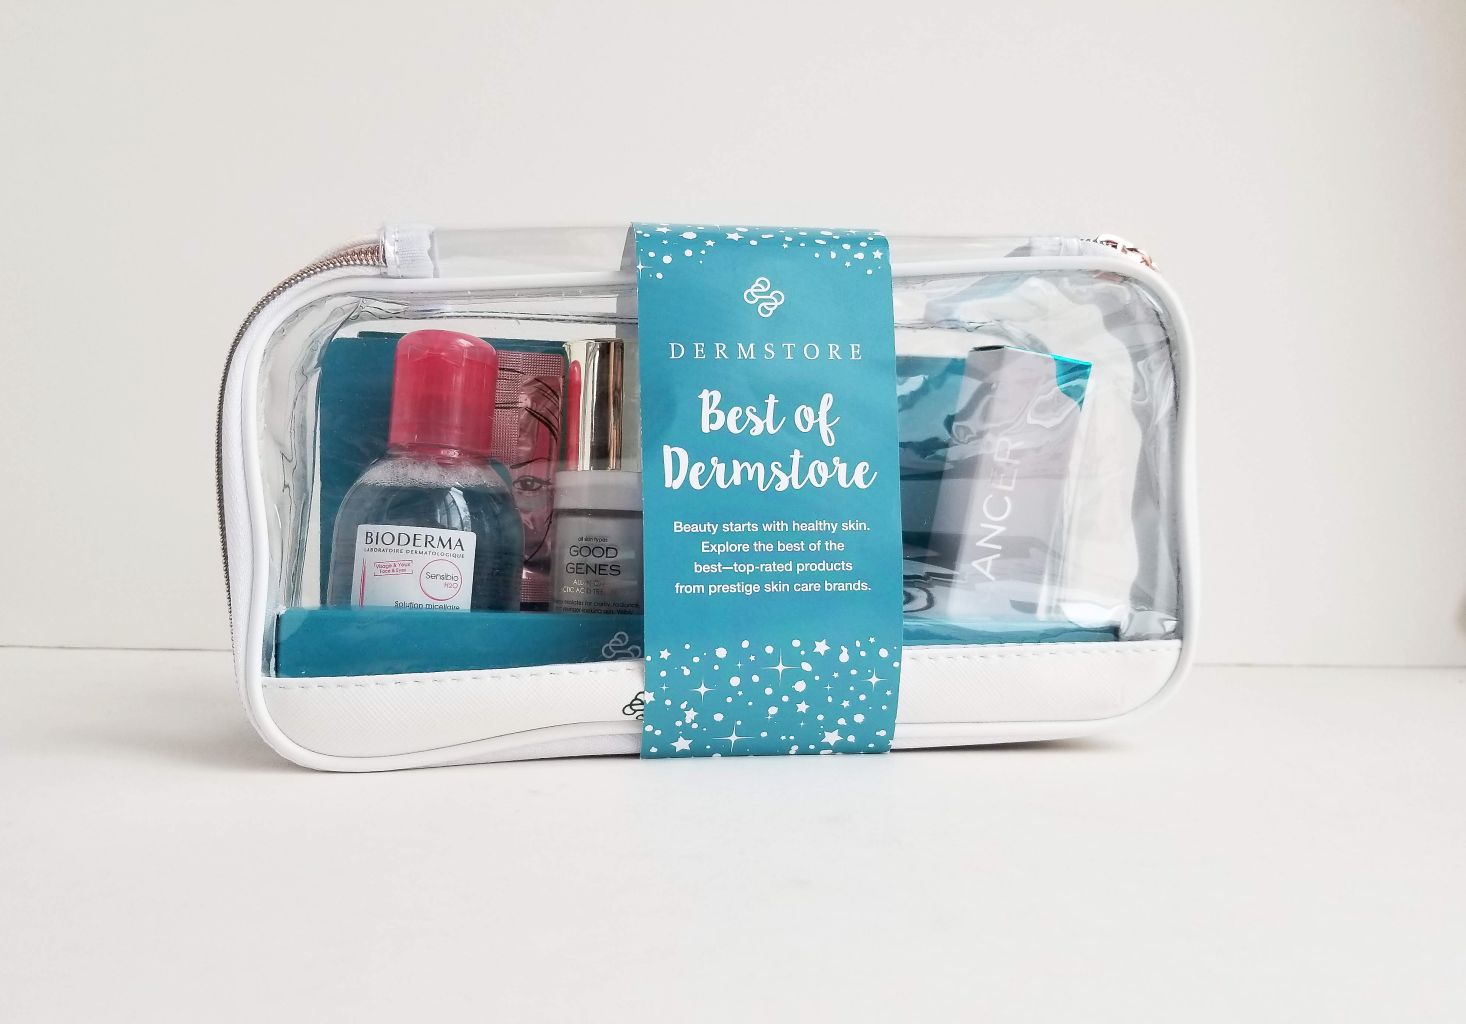 Target Beauty Box "Best of Dermstore" Review - Holiday 2018 | MSA